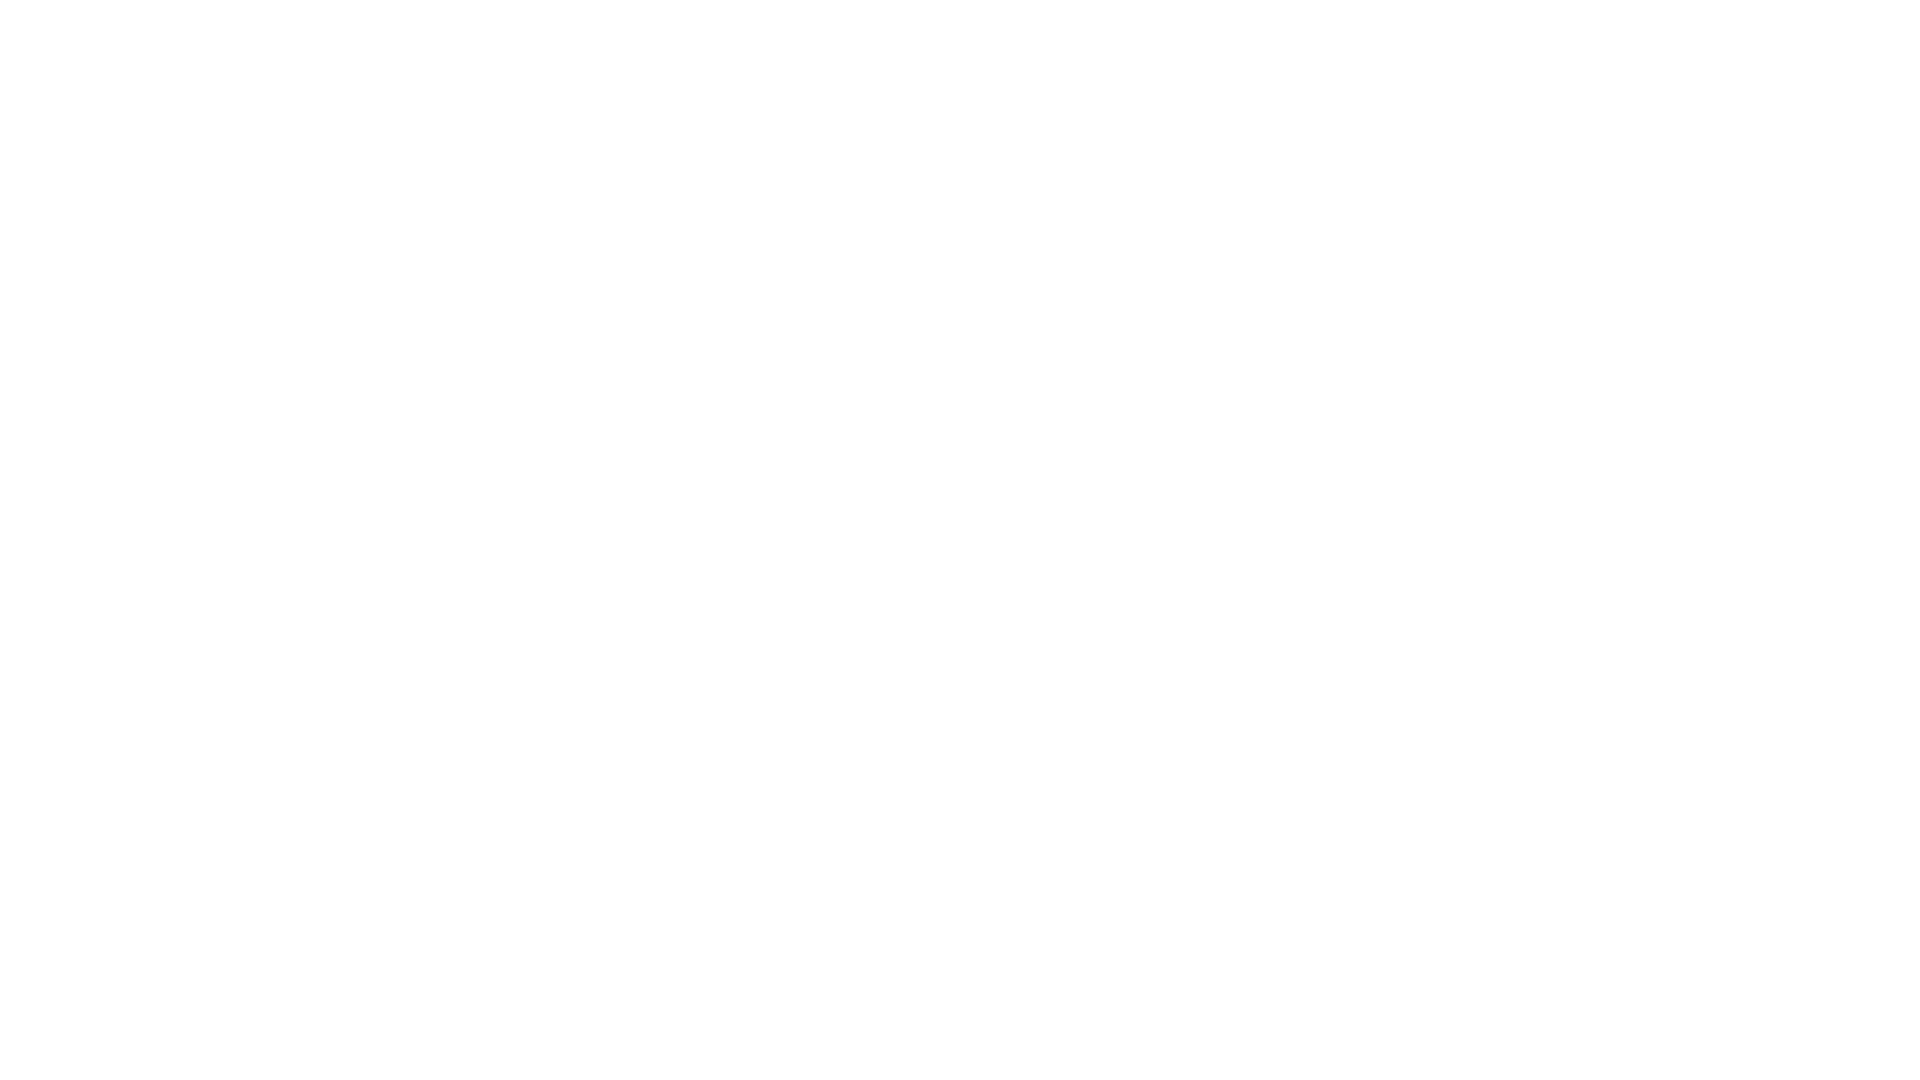 Clevr-Image-1920x1080px-lines-5@2x